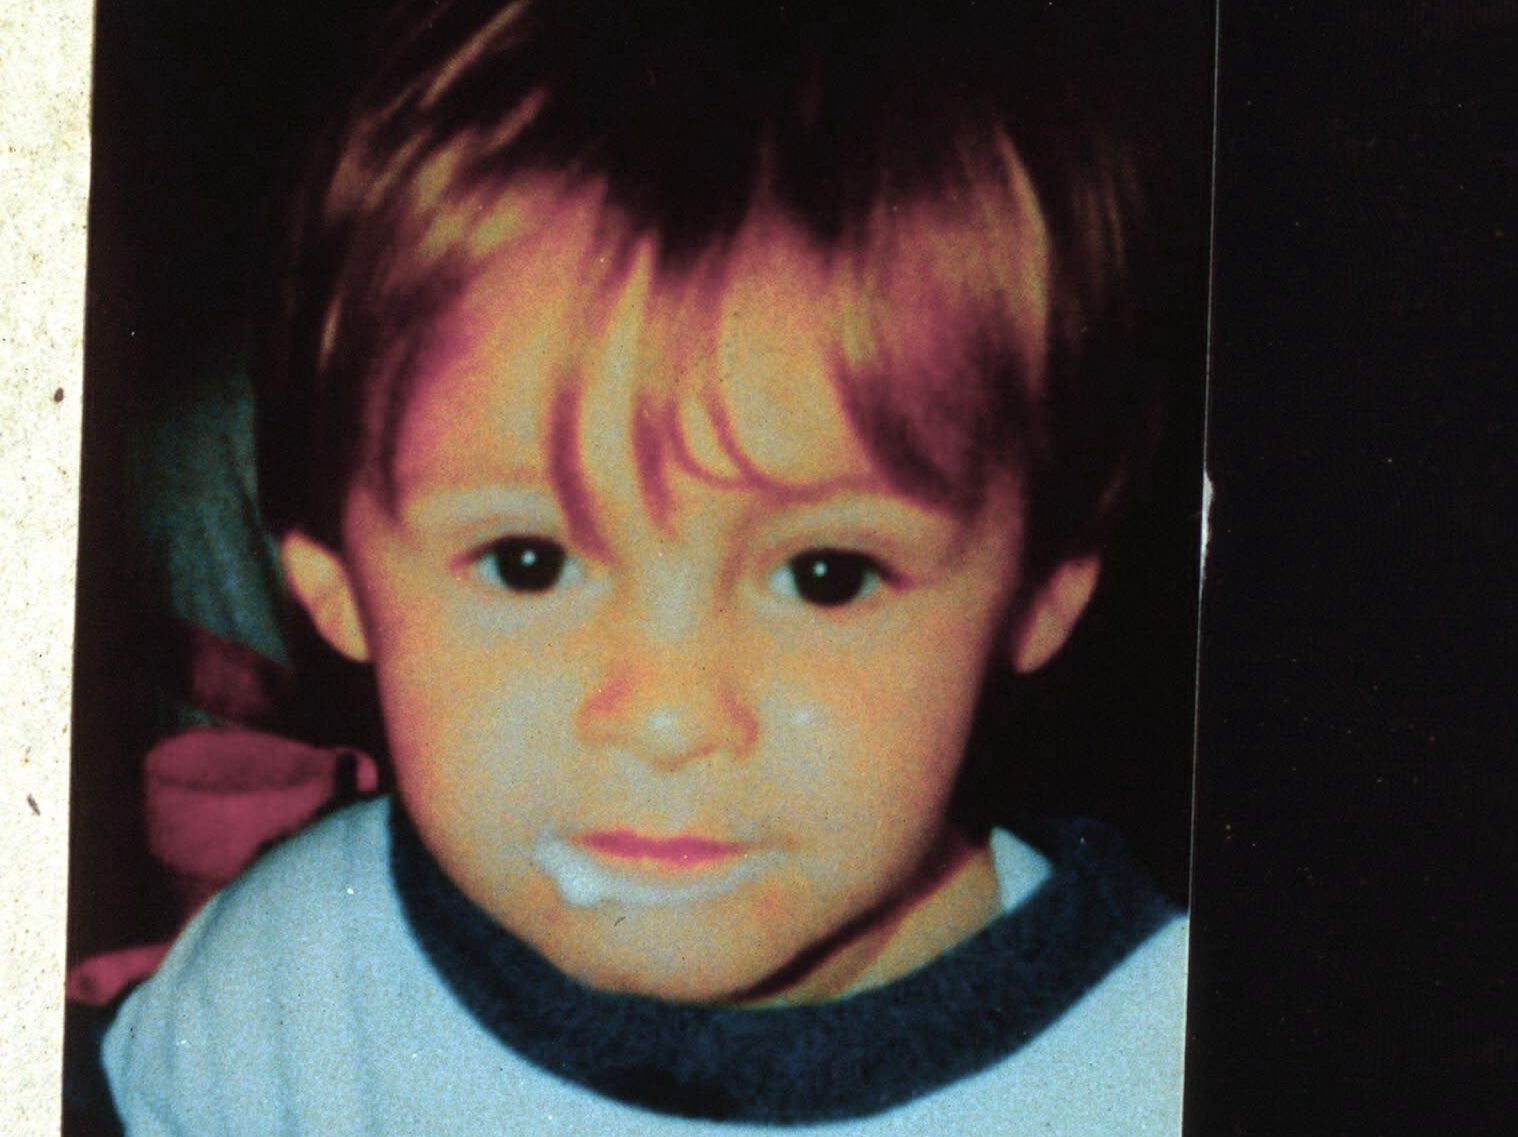 James Bulger was killed in one of the UK’s most notorious murders